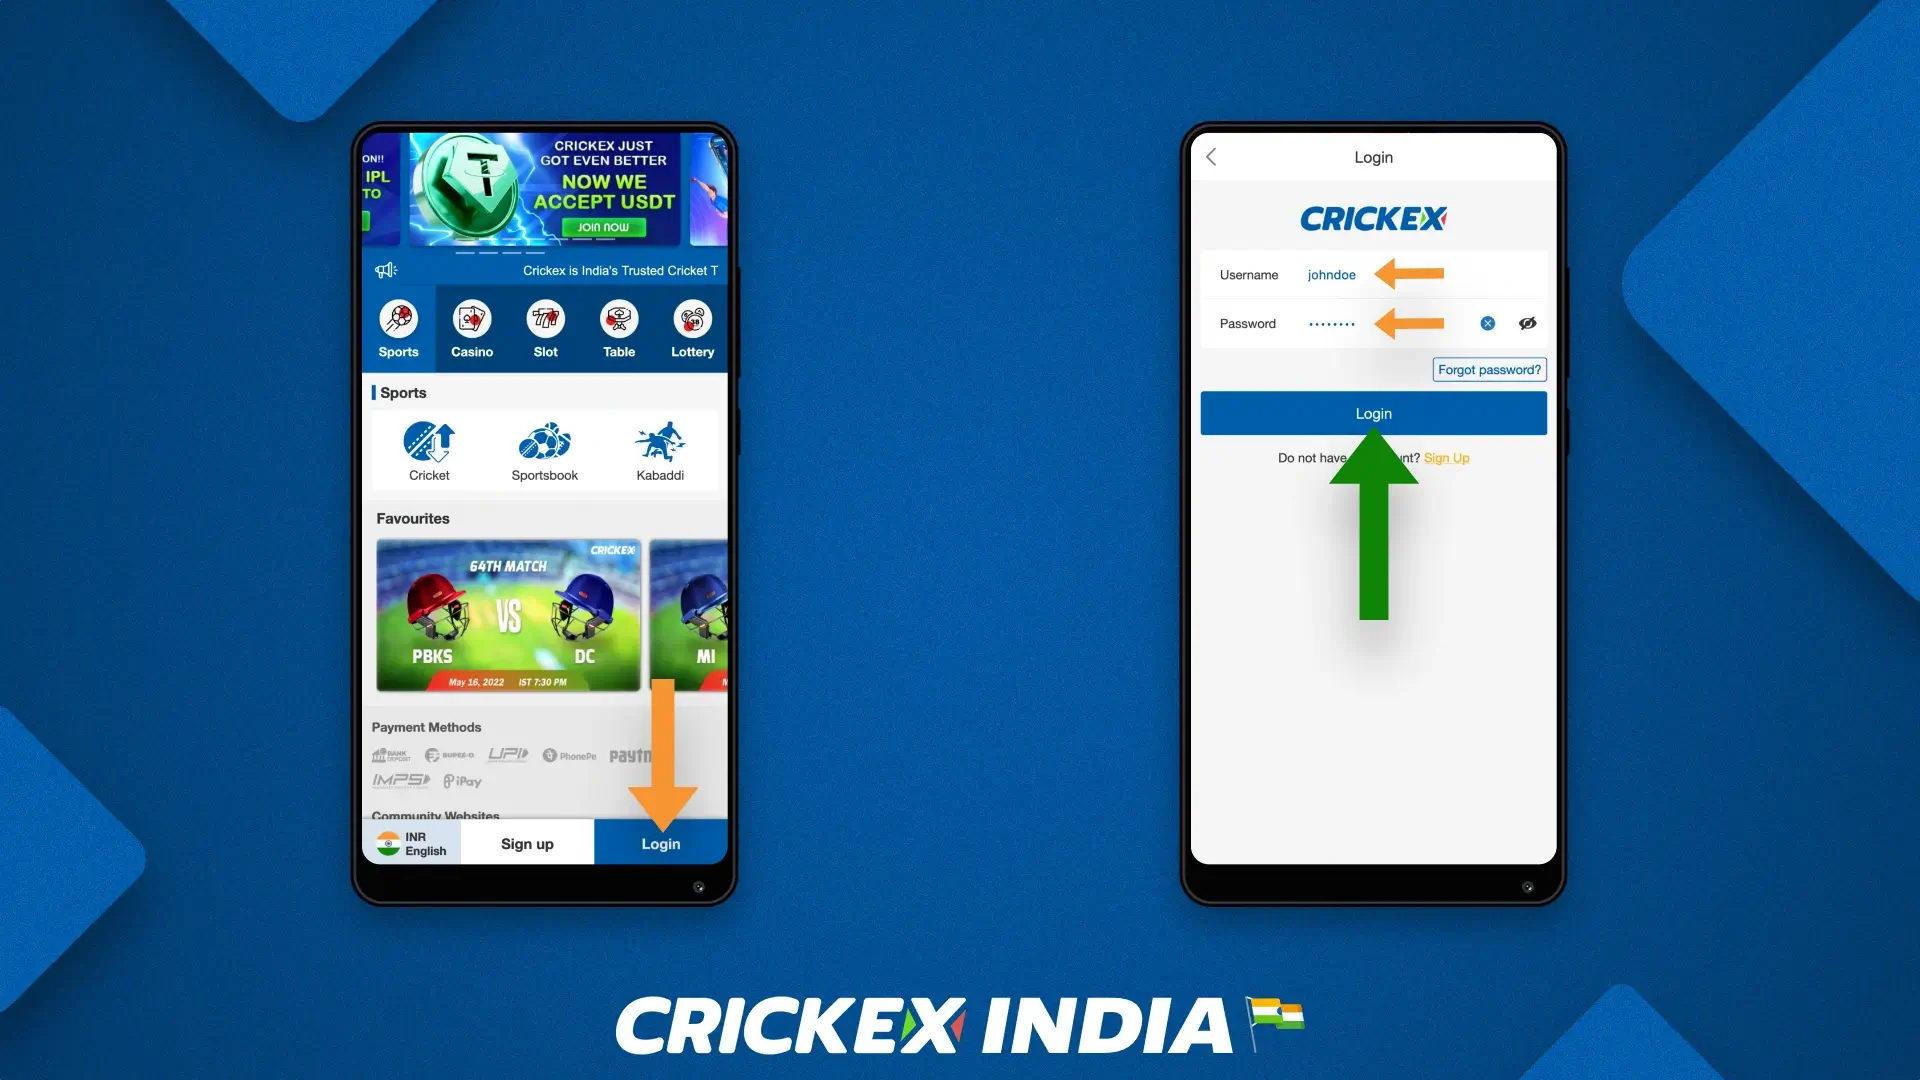 How to log in to your Crickex account via the mobile app